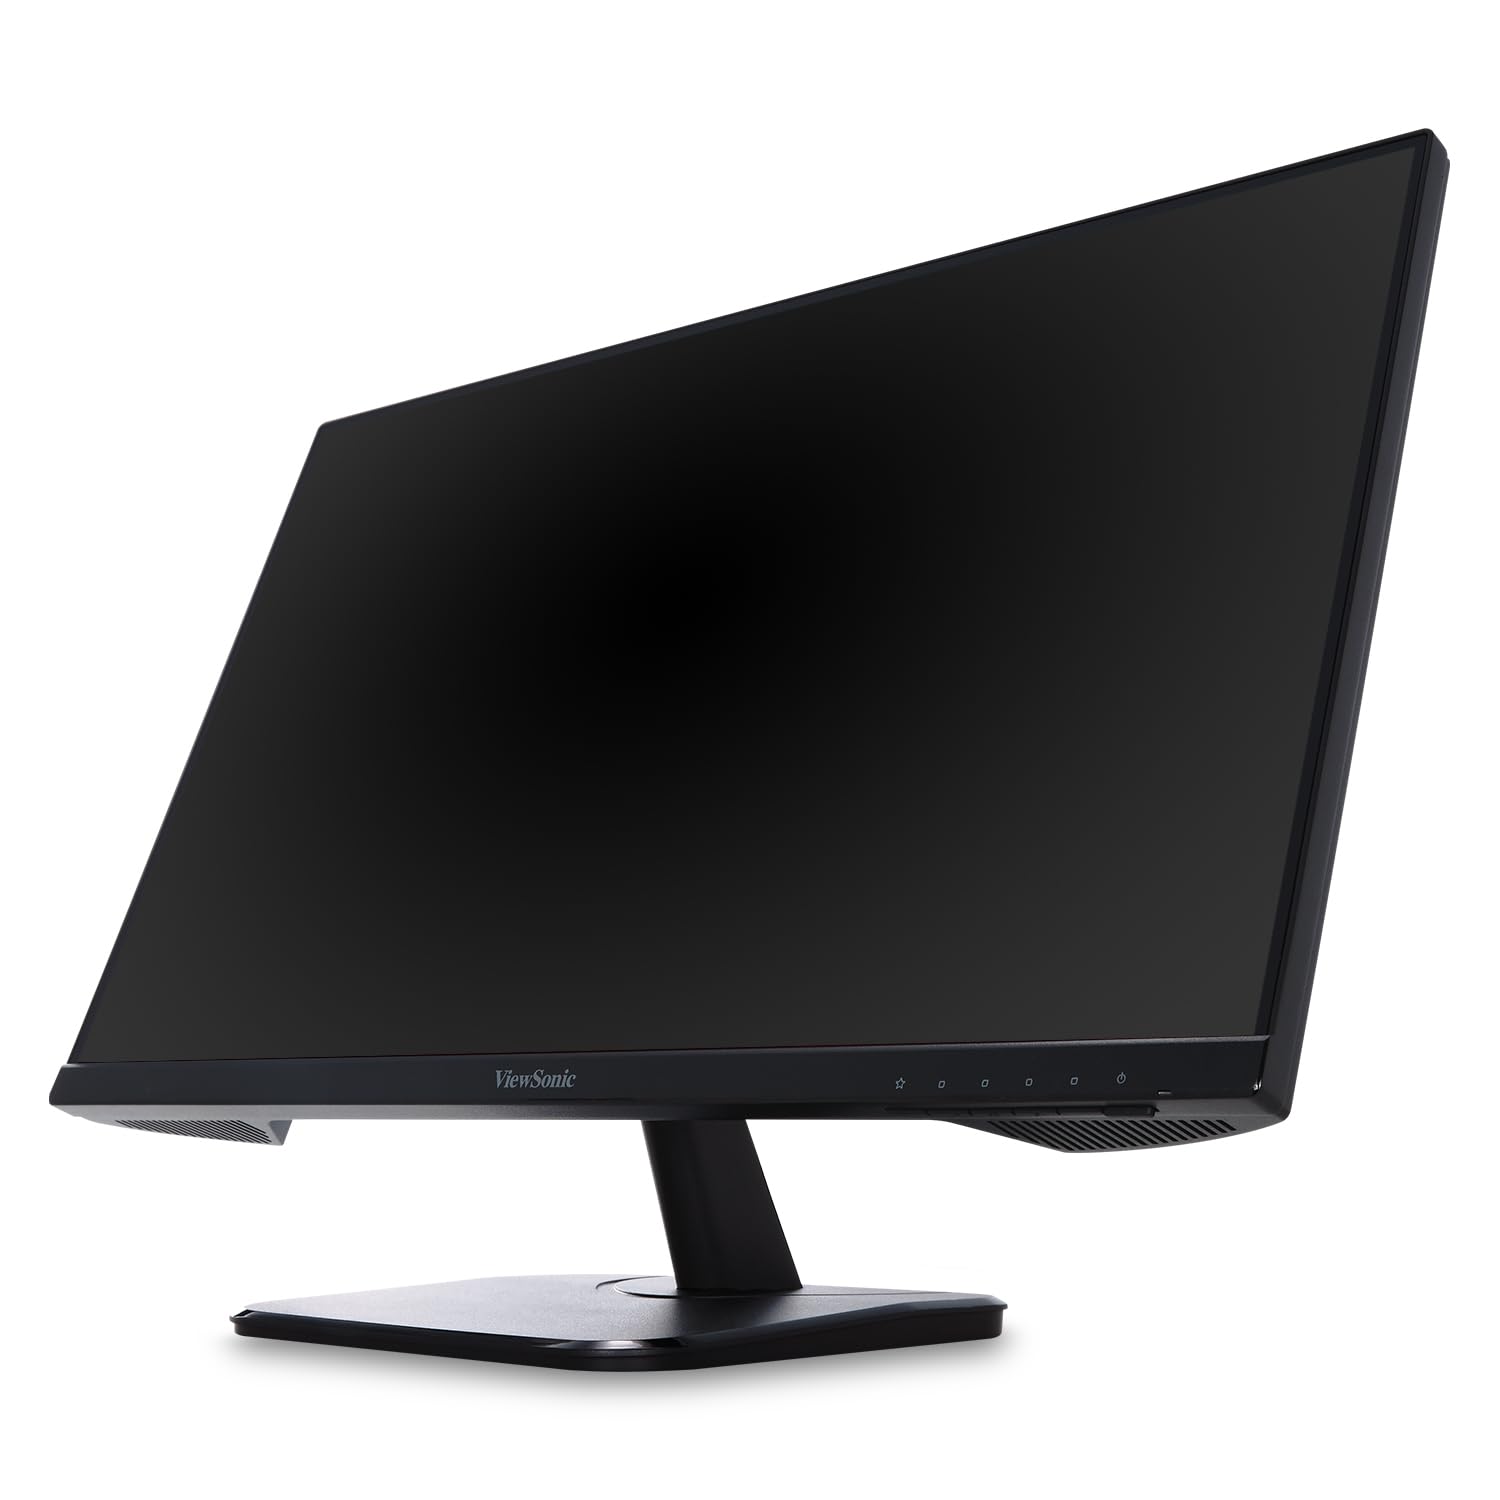 ViewSonic VA2756-4K-MHD 27 Inch IPS 4K Monitor with Ultra-Thin Bezels, HDMI and DisplayPort Inputs for Home and Office